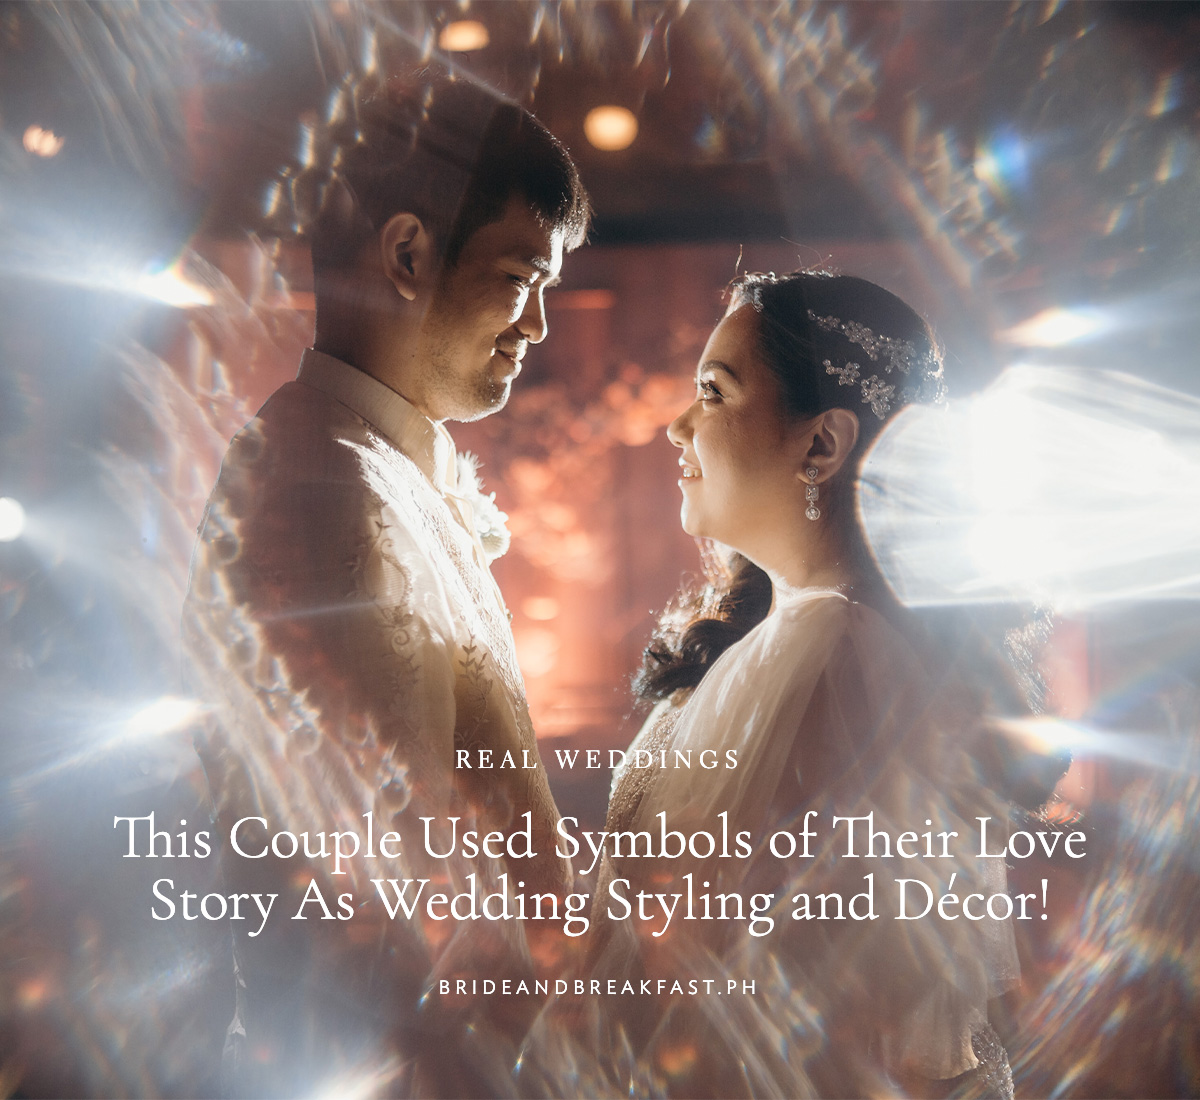 This Couple Used Symbols of Their Love Story As Wedding Styling and Décor!